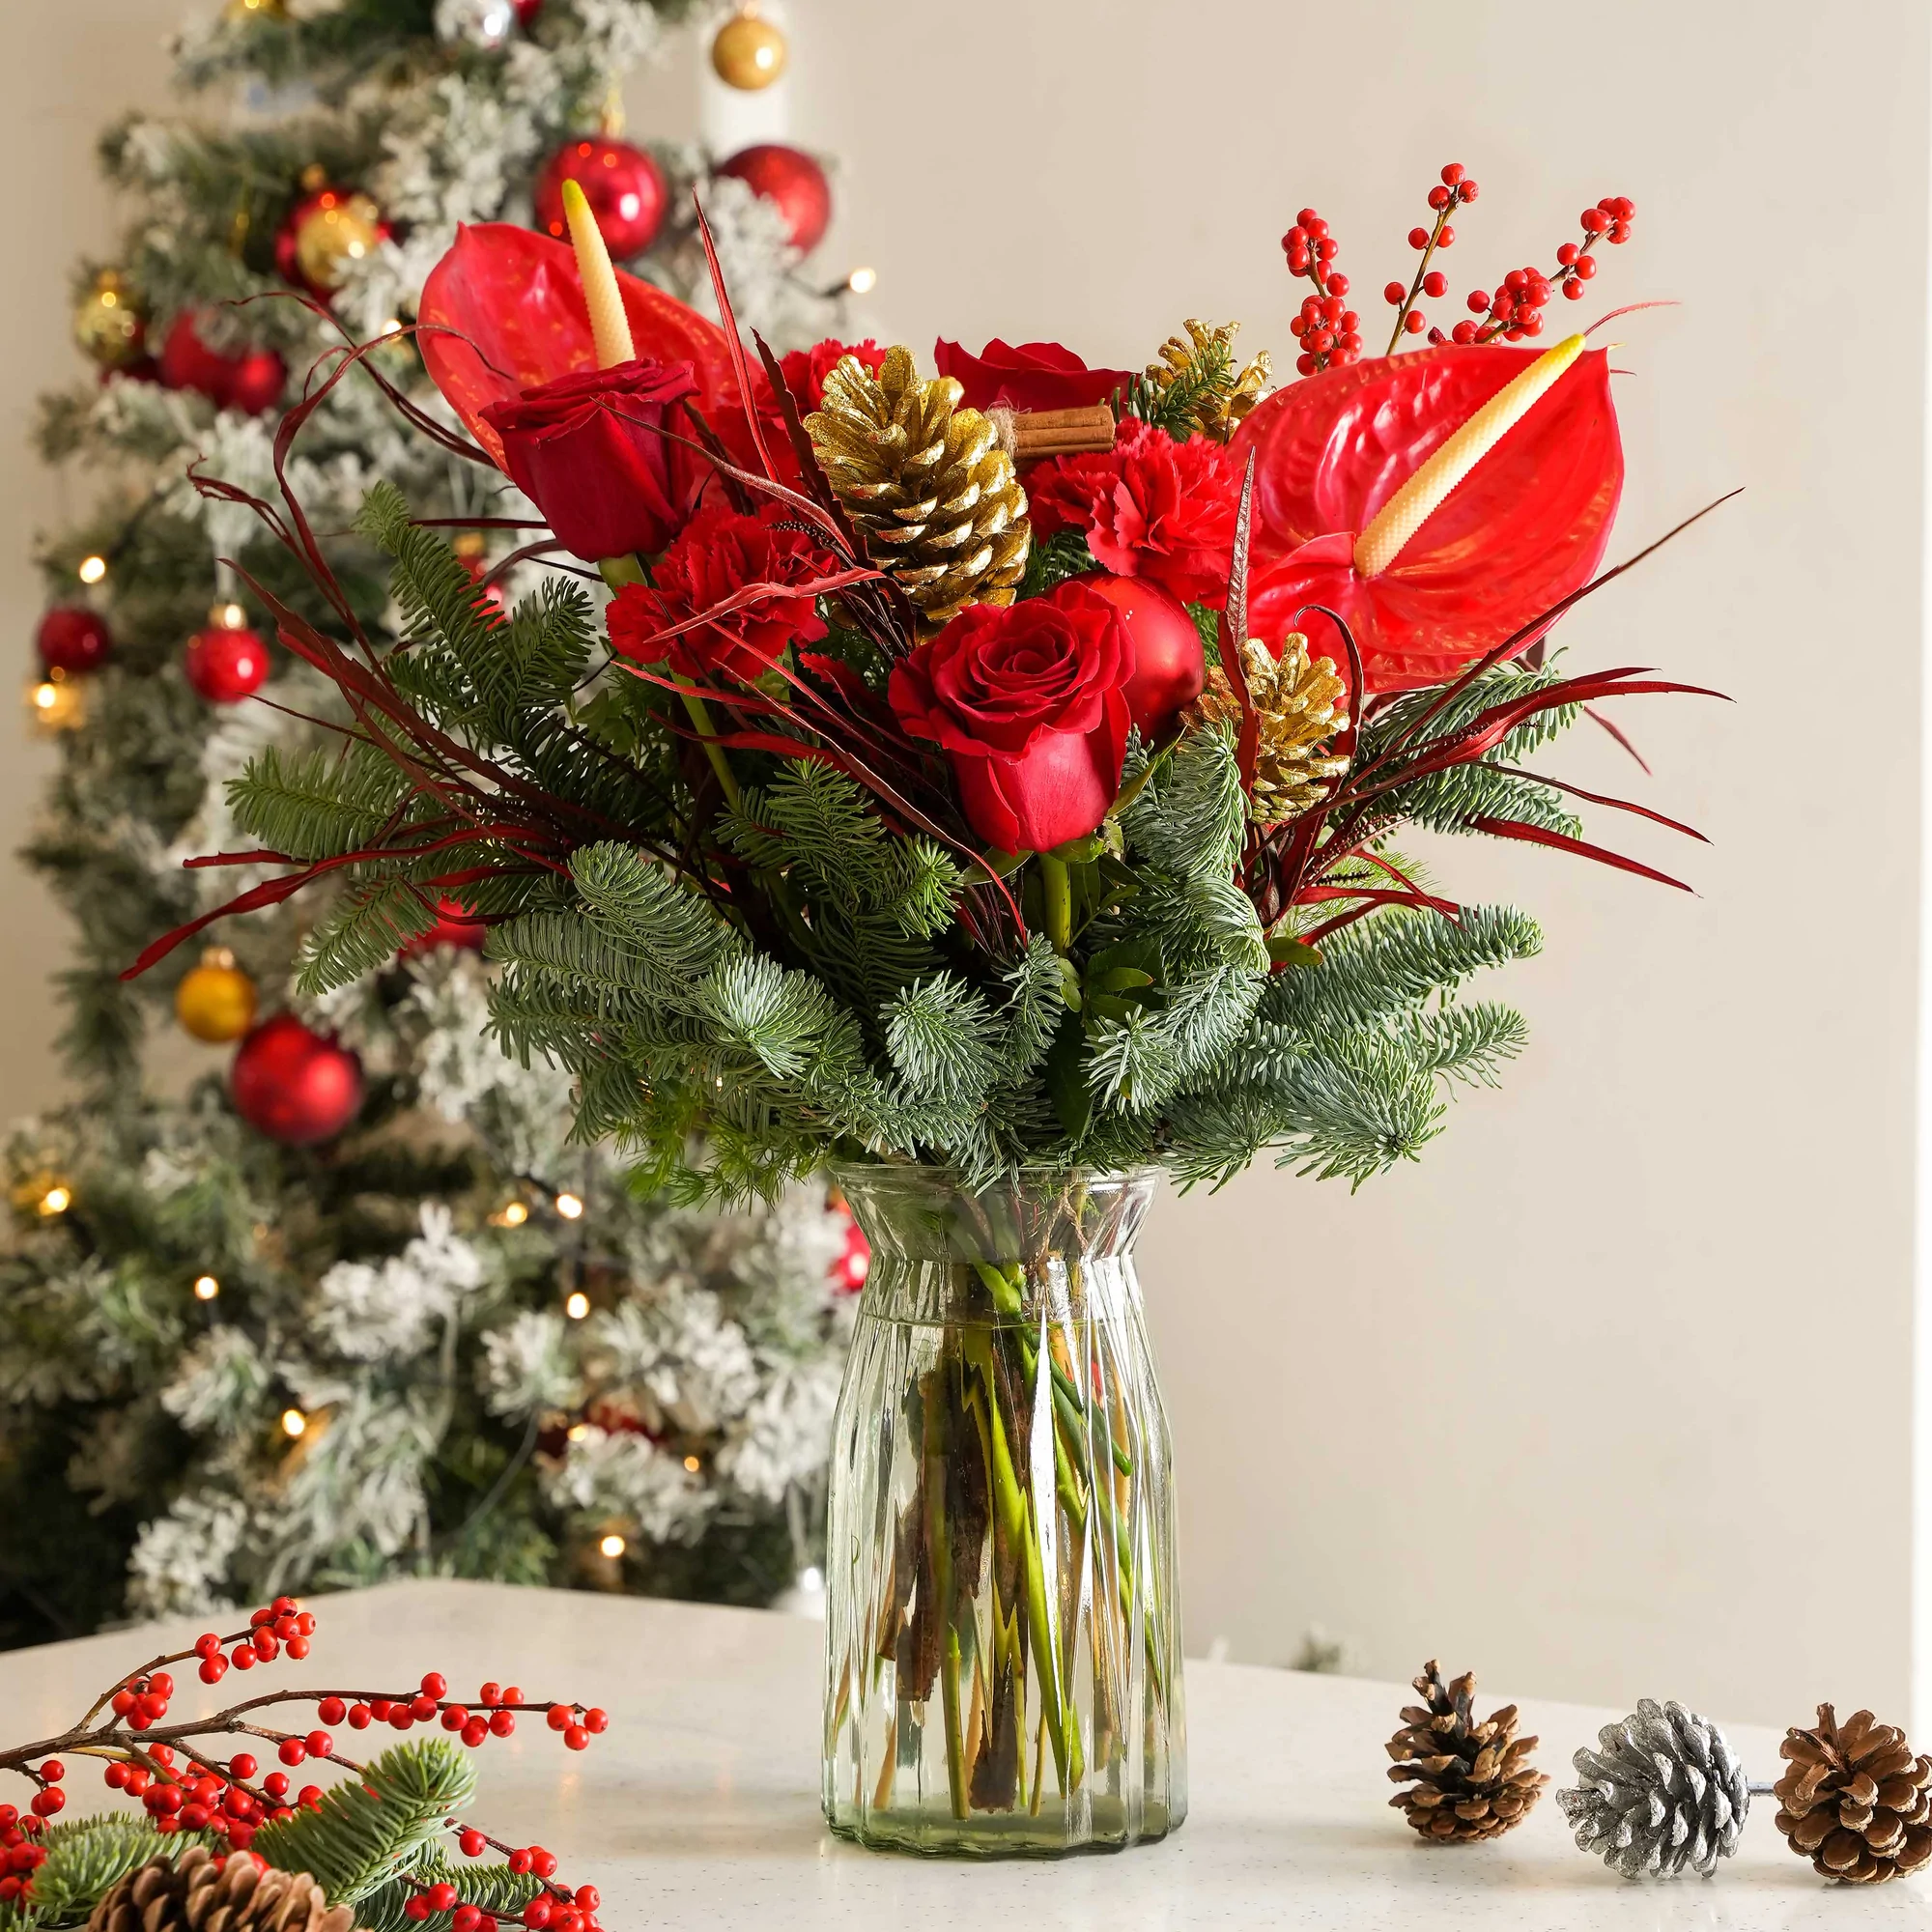 What Are The Best Flowers For Occasions Like Chirstmas?